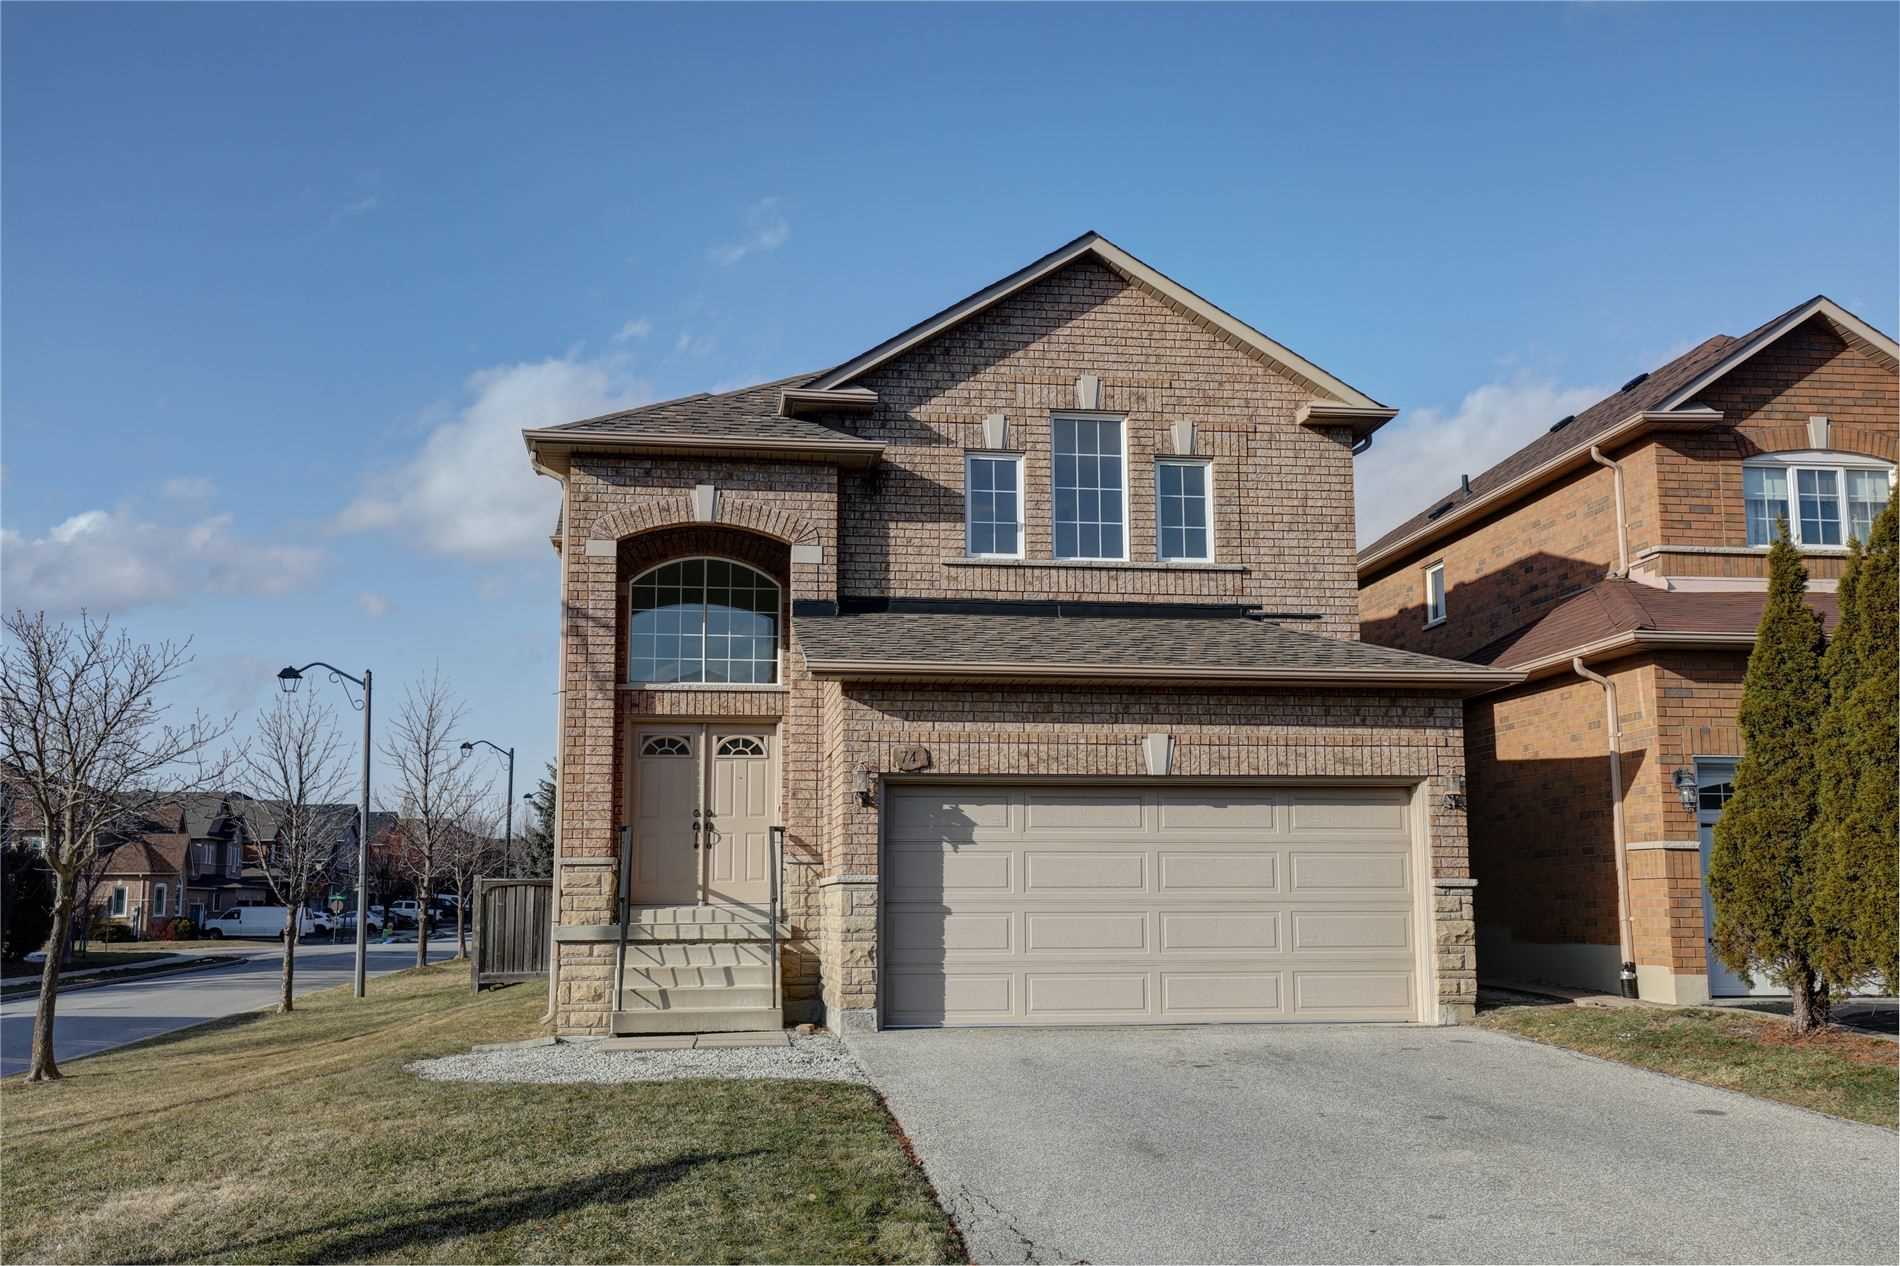 SOLD- 3 Bedroom Detached Home in Sonoma Heights on Crown Cres. in Woodbridge